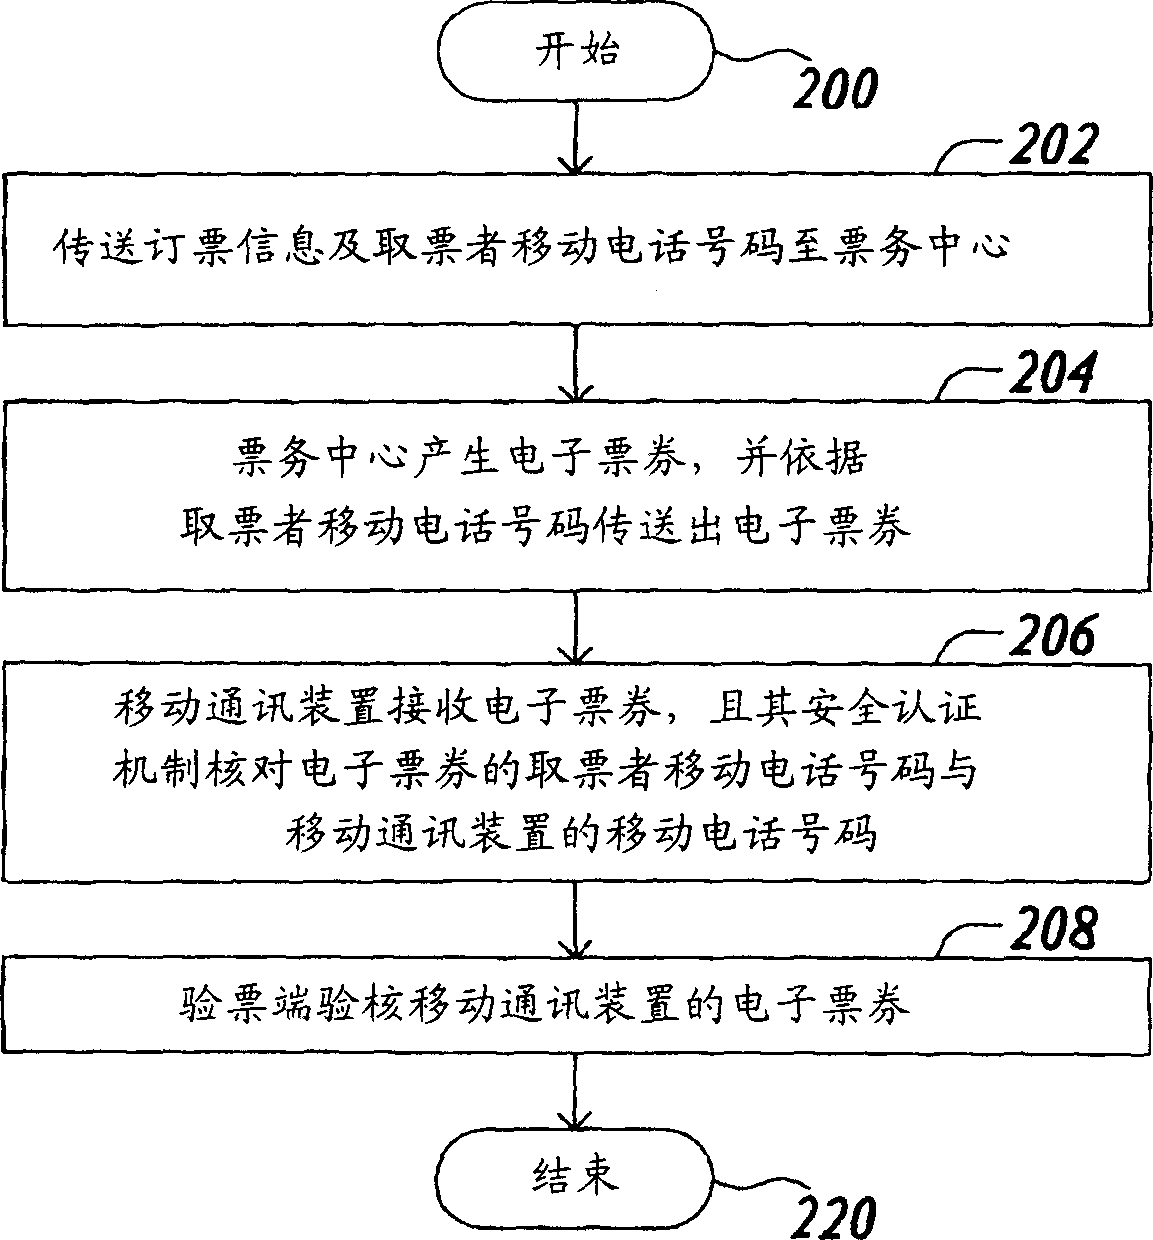 Mobile electronic bill system and method thereof